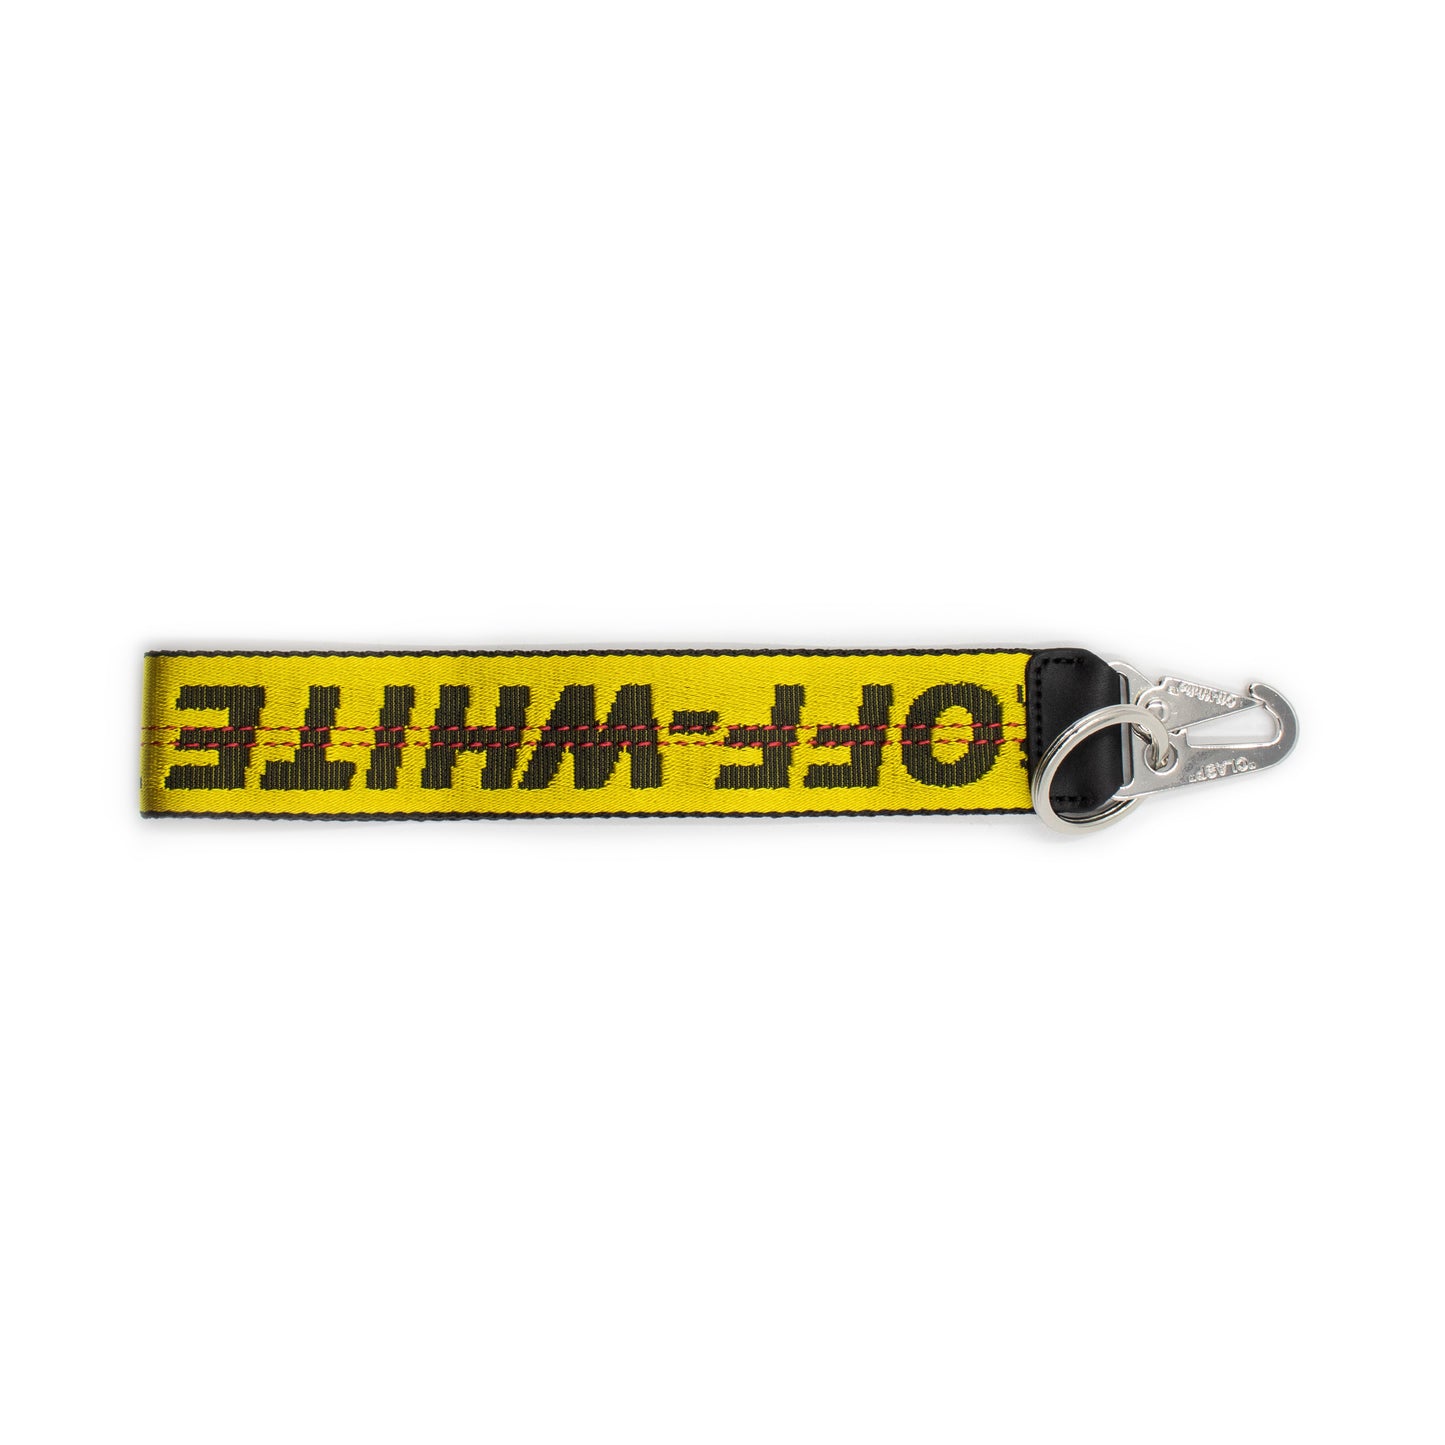 Classic Industrial Key Holder in Yellow Black